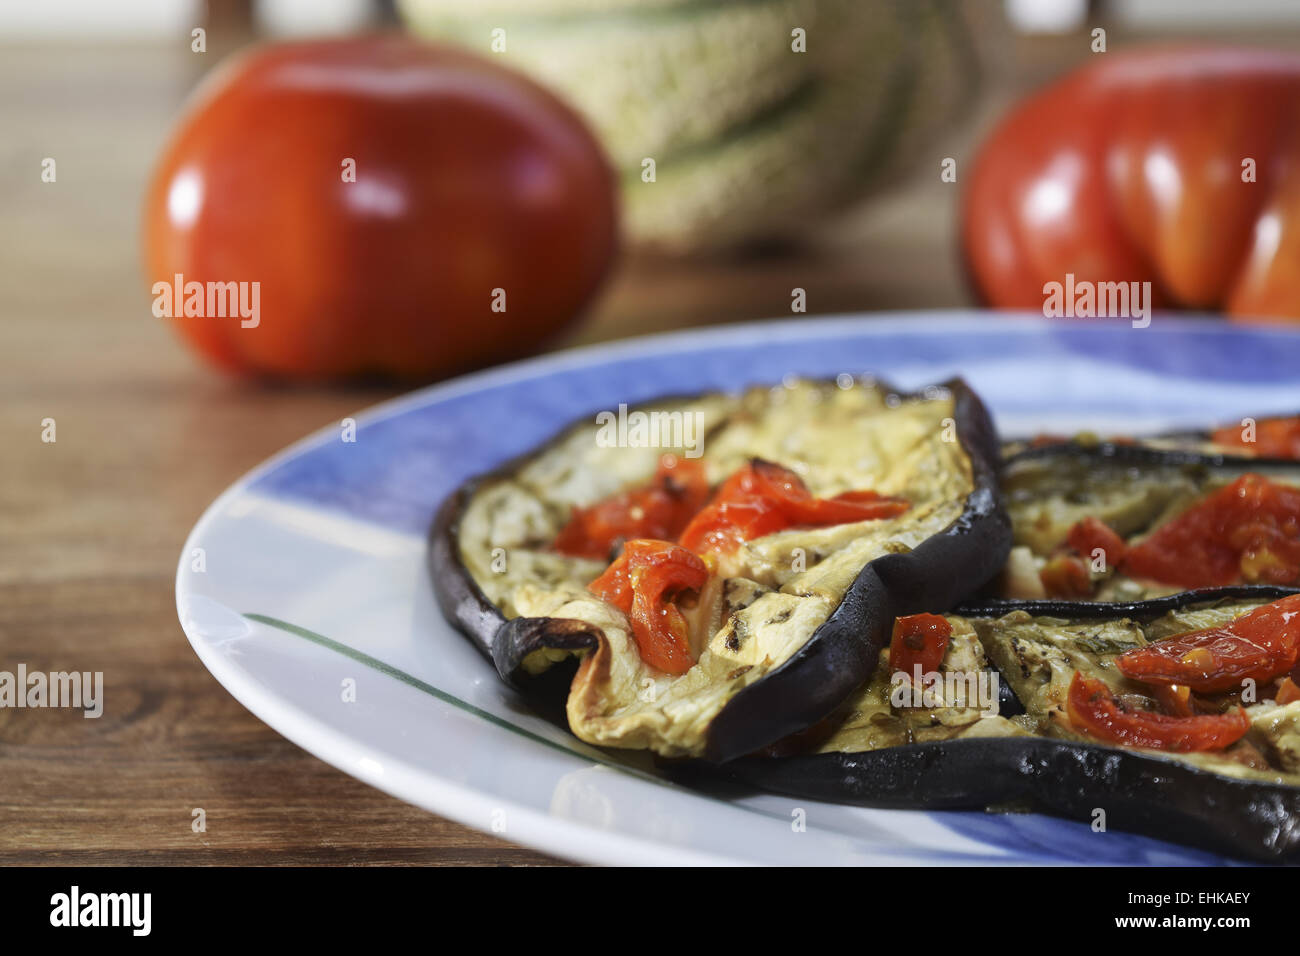 aubergines, tomatoes and fruit  for a vegetarian diet Stock Photo